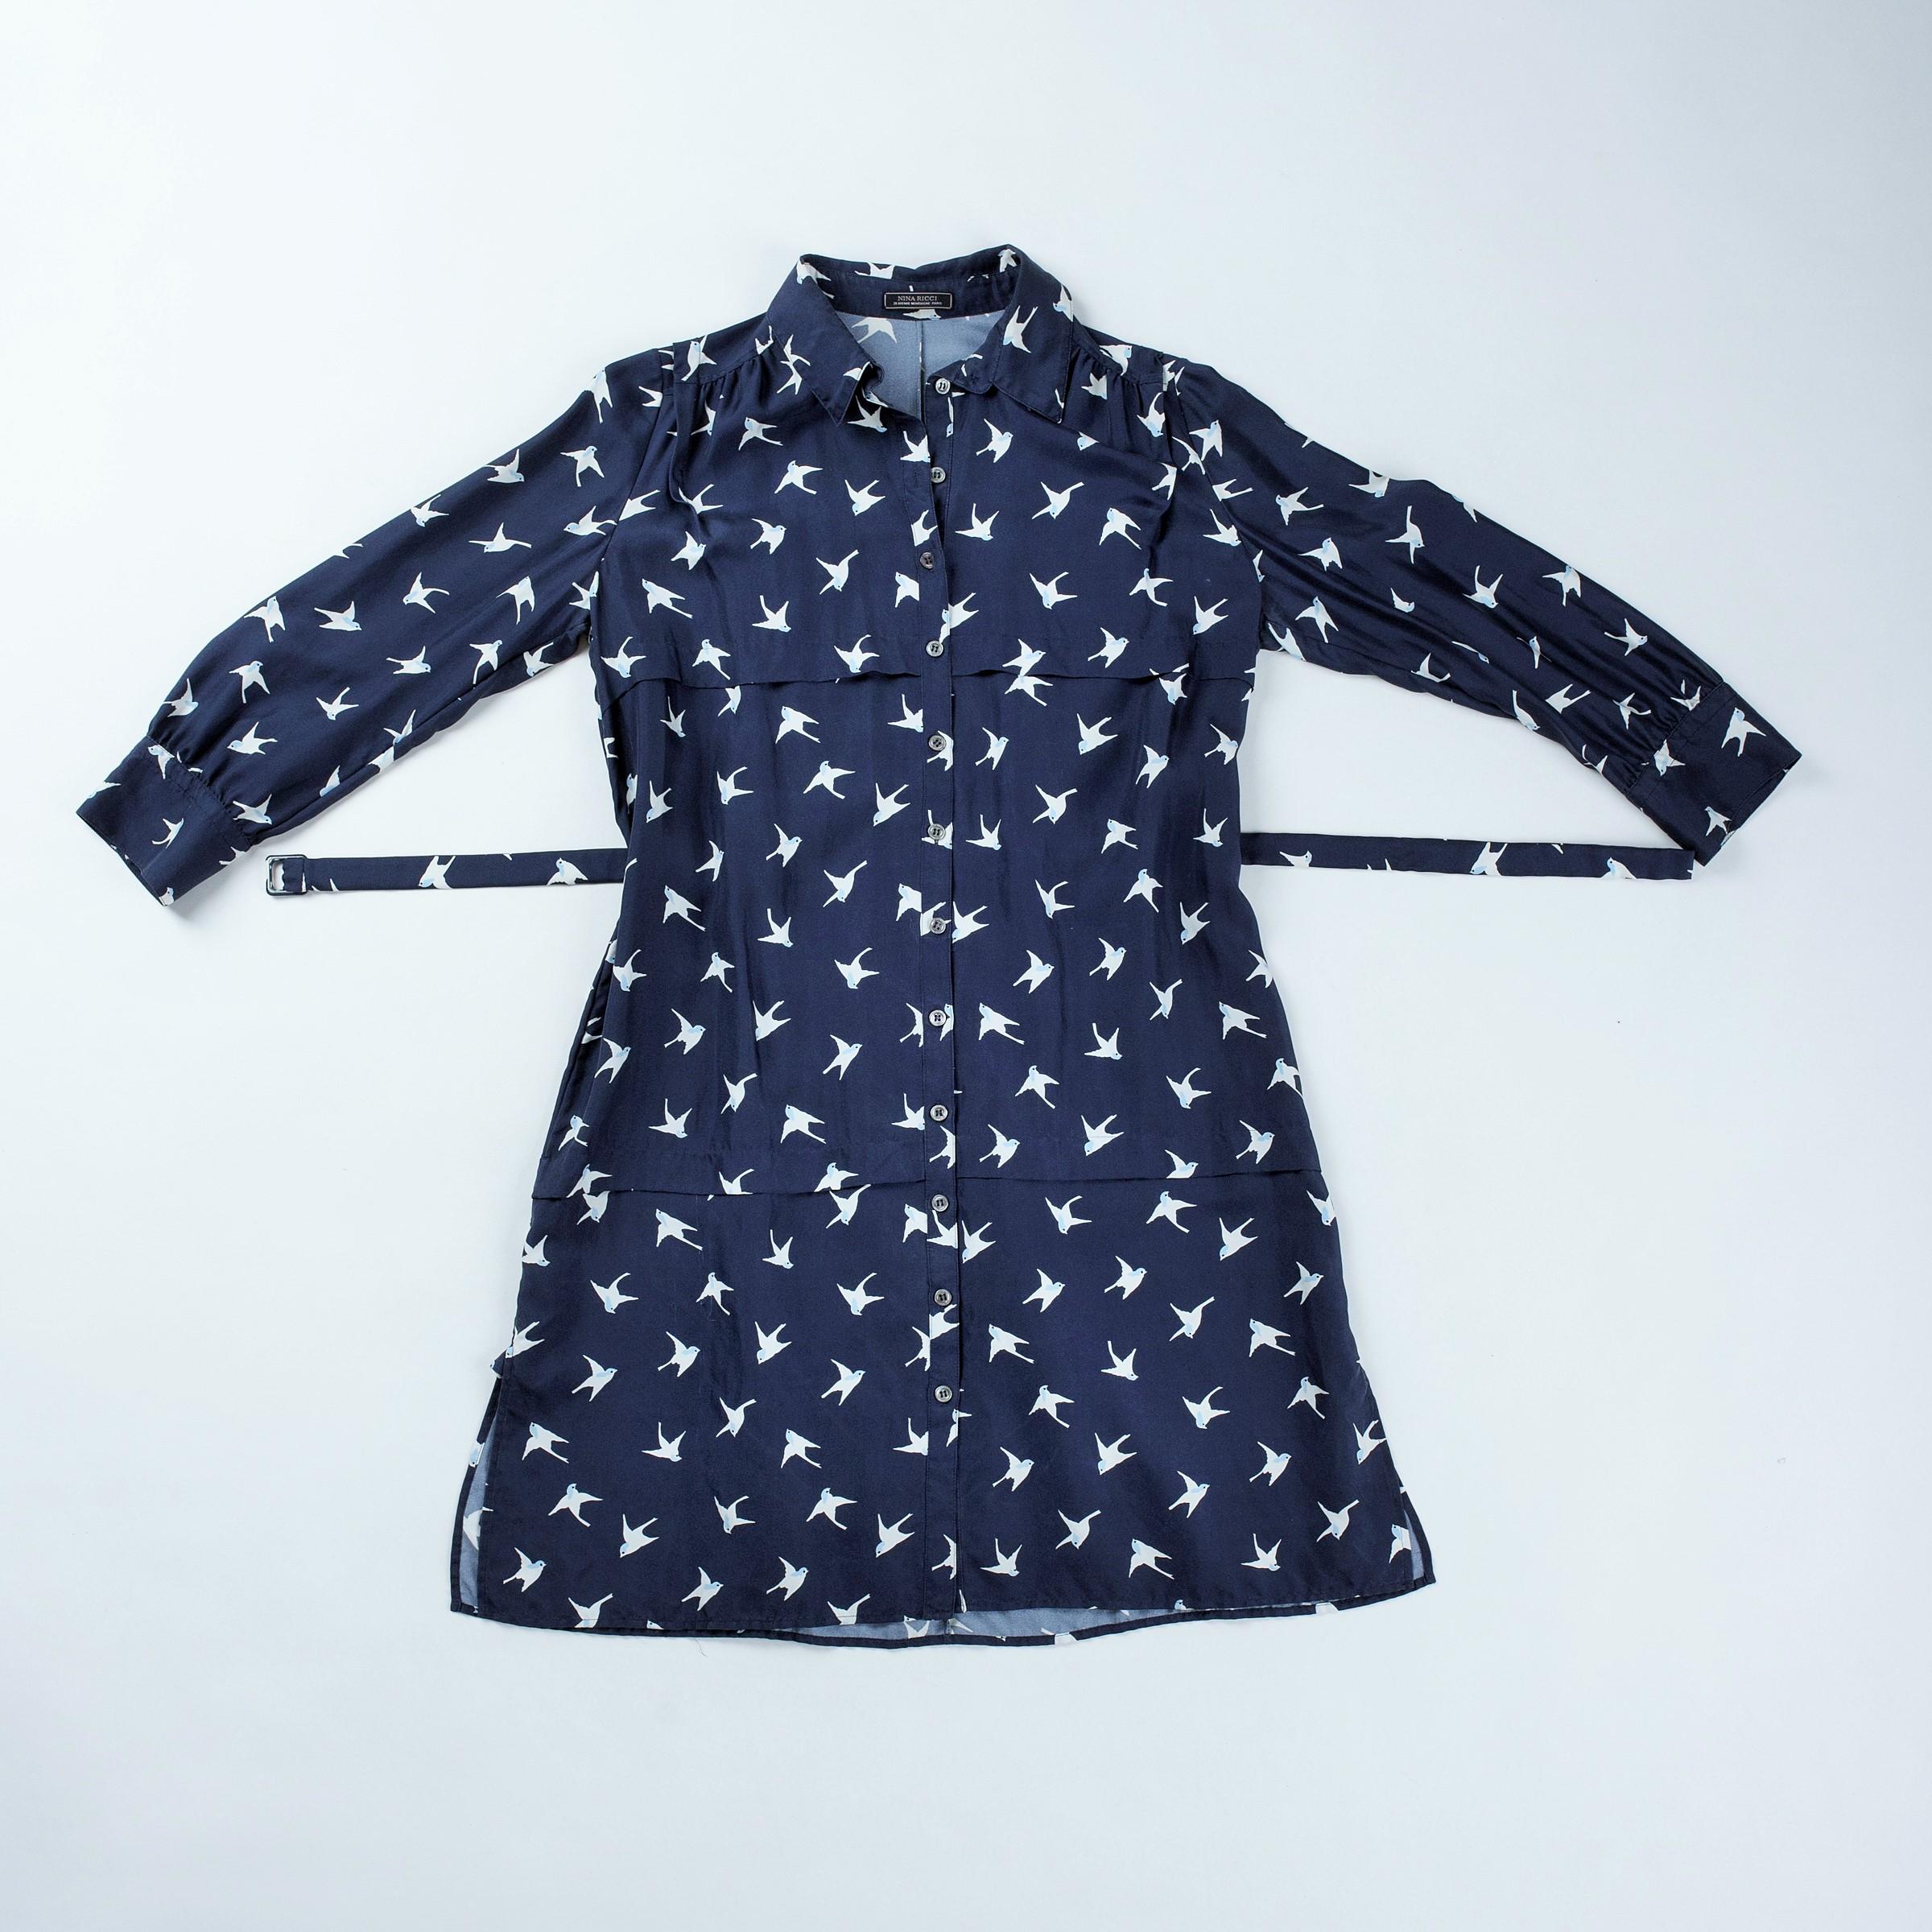 Circa 2000

France

Elegant and discreet blouse dress in navy silk twill printed with swallows by Nina Ricci.  Fluid dress with a belt at the waist and long three-quarter length sleeves with a little puff. Closed in the front by twelve pearly